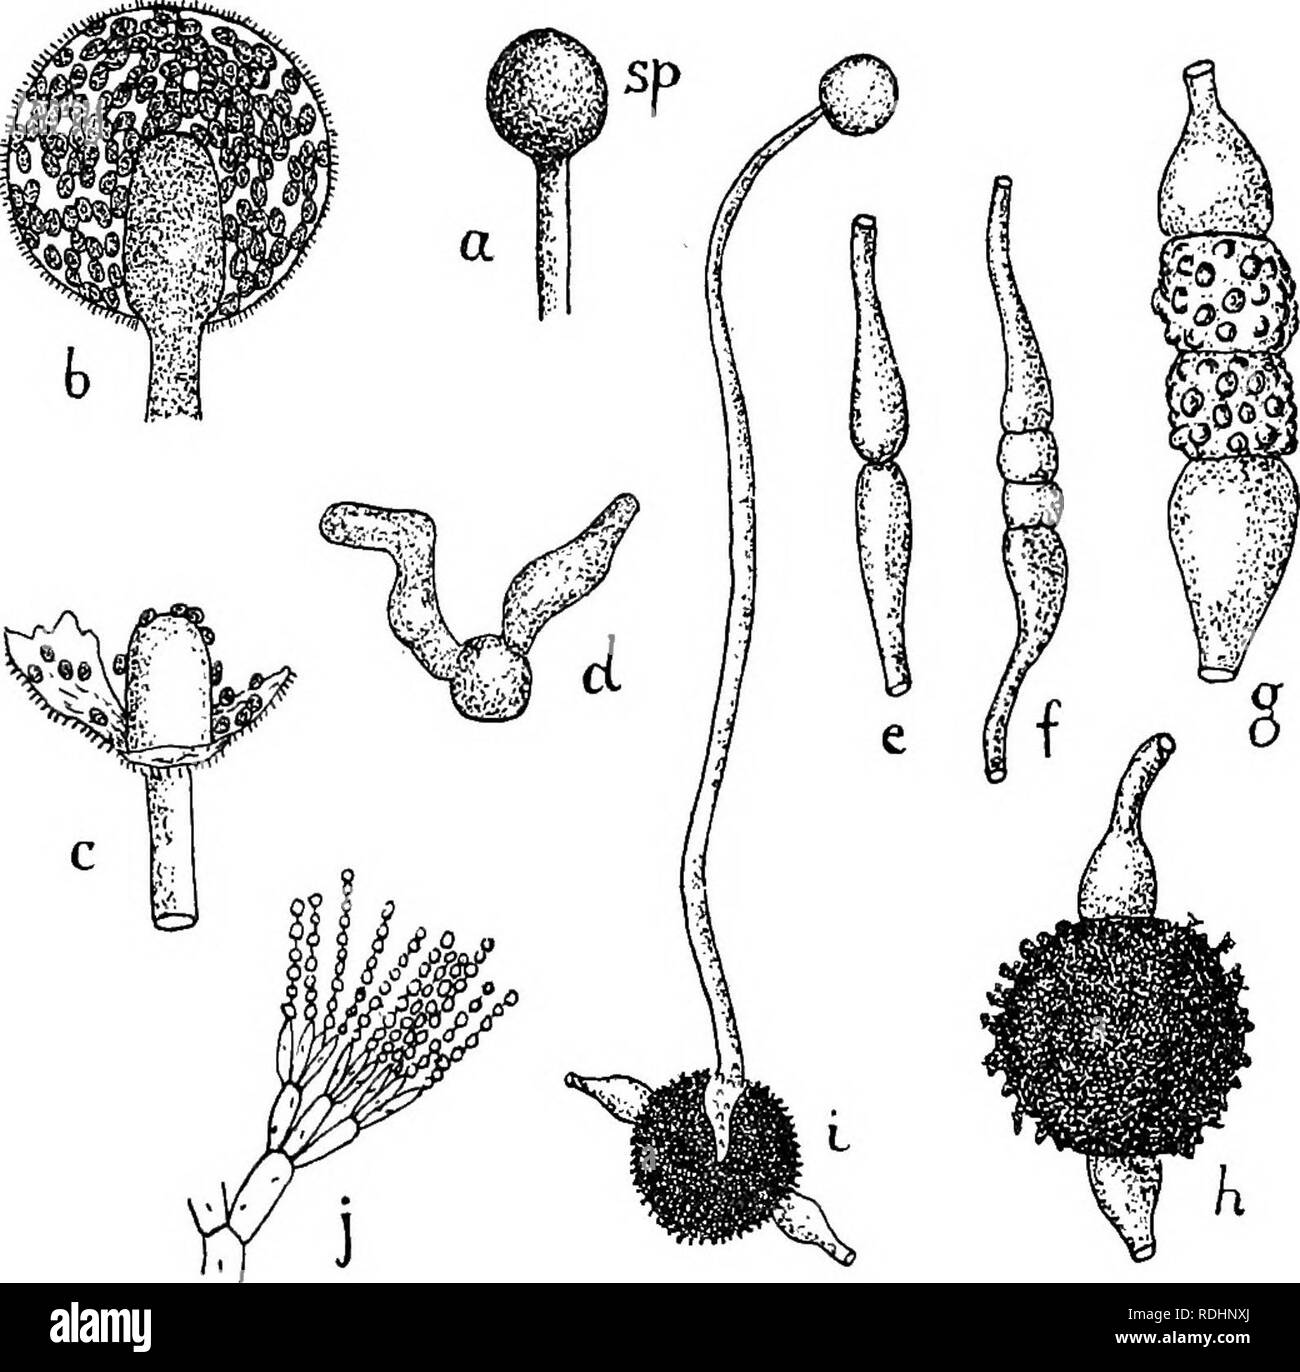 . Elements of plant biology. Plant physiology. PENICILLIUM 165 lightly connected, so that a slight jar or a current of air is sufficient to detach them, and they float off into. Fig. 16.—Reproduction of Mucor. (i) Spore formation (a-H) : a, young sporangium (sp); b, optical section of mature sporangium {col., columella) ; c, remains of sporangium wall after bursting, with a few spores still adhering ; d, germinating spore with two germ tubes. {2) e-h. Conjugation : e, conjugating hyphas in contact; /, separation of tips of conjugating hyphse ; g, later stage; h, mature zygote; i, germination o Stock Photo